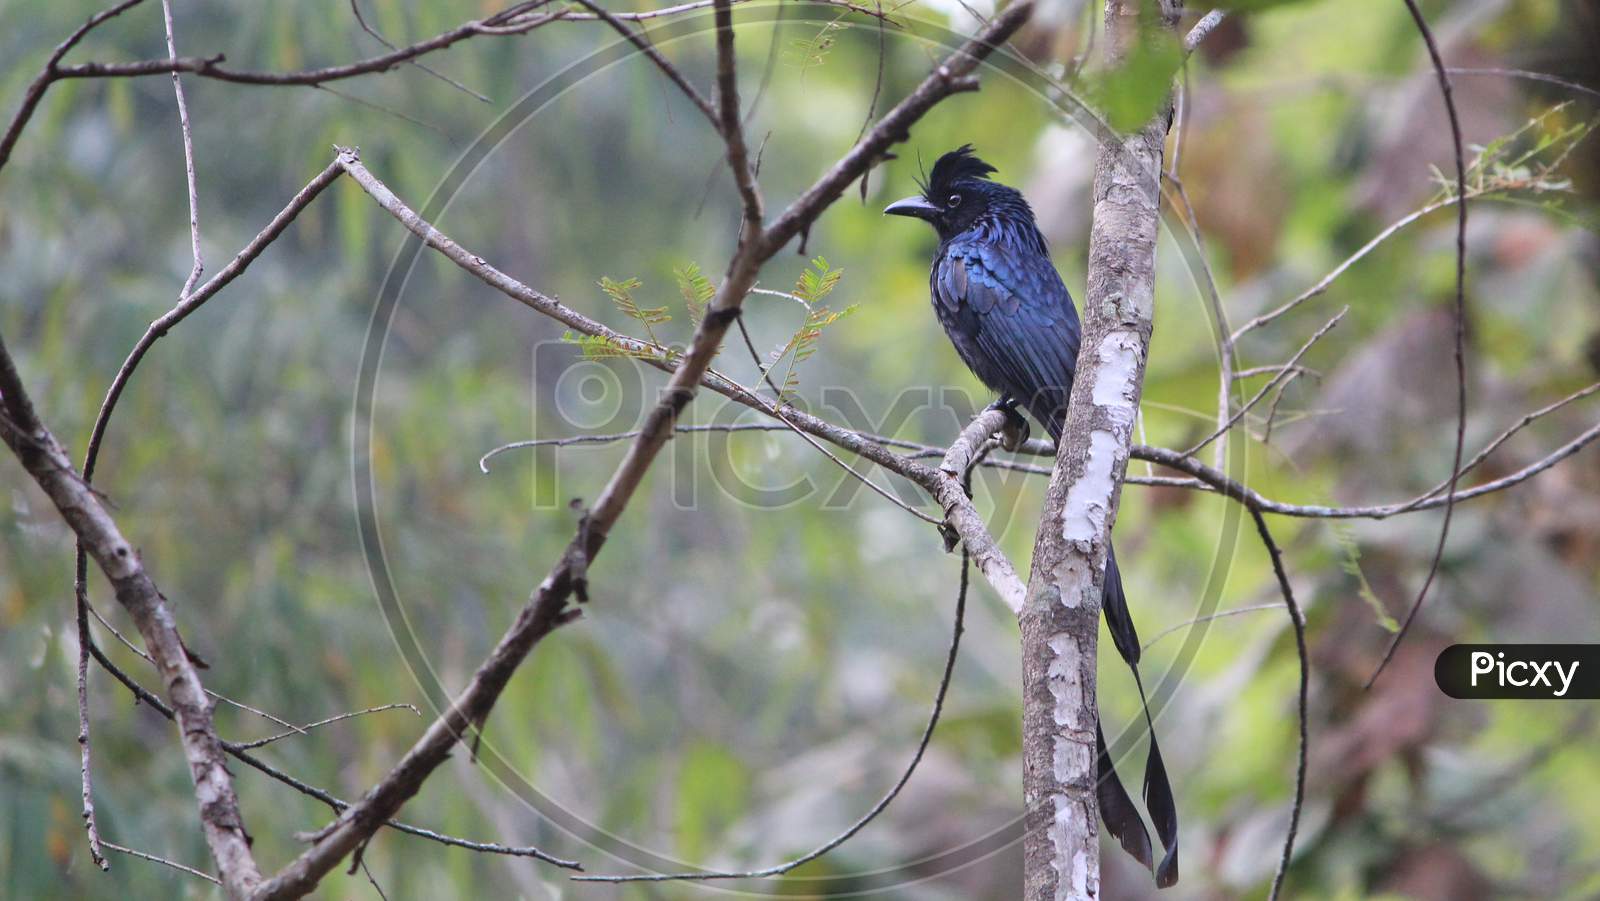 Greater racket-tailed drongo